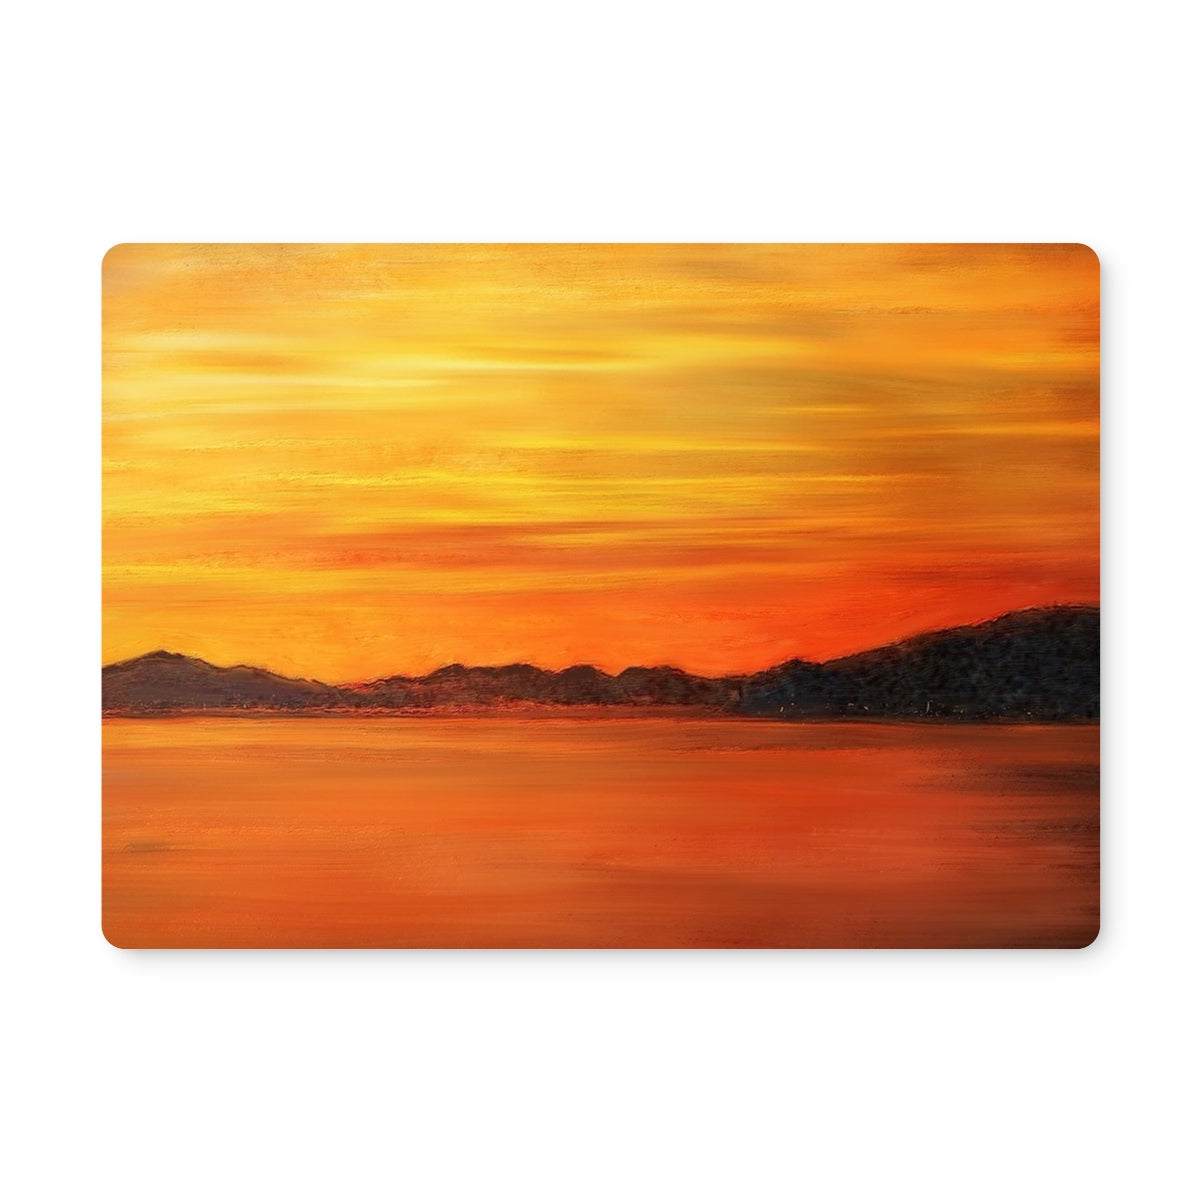 Loch Fyne Sunset Art Gifts Placemat-Placemats-Scottish Lochs & Mountains Art Gallery-2 Placemats-Paintings, Prints, Homeware, Art Gifts From Scotland By Scottish Artist Kevin Hunter